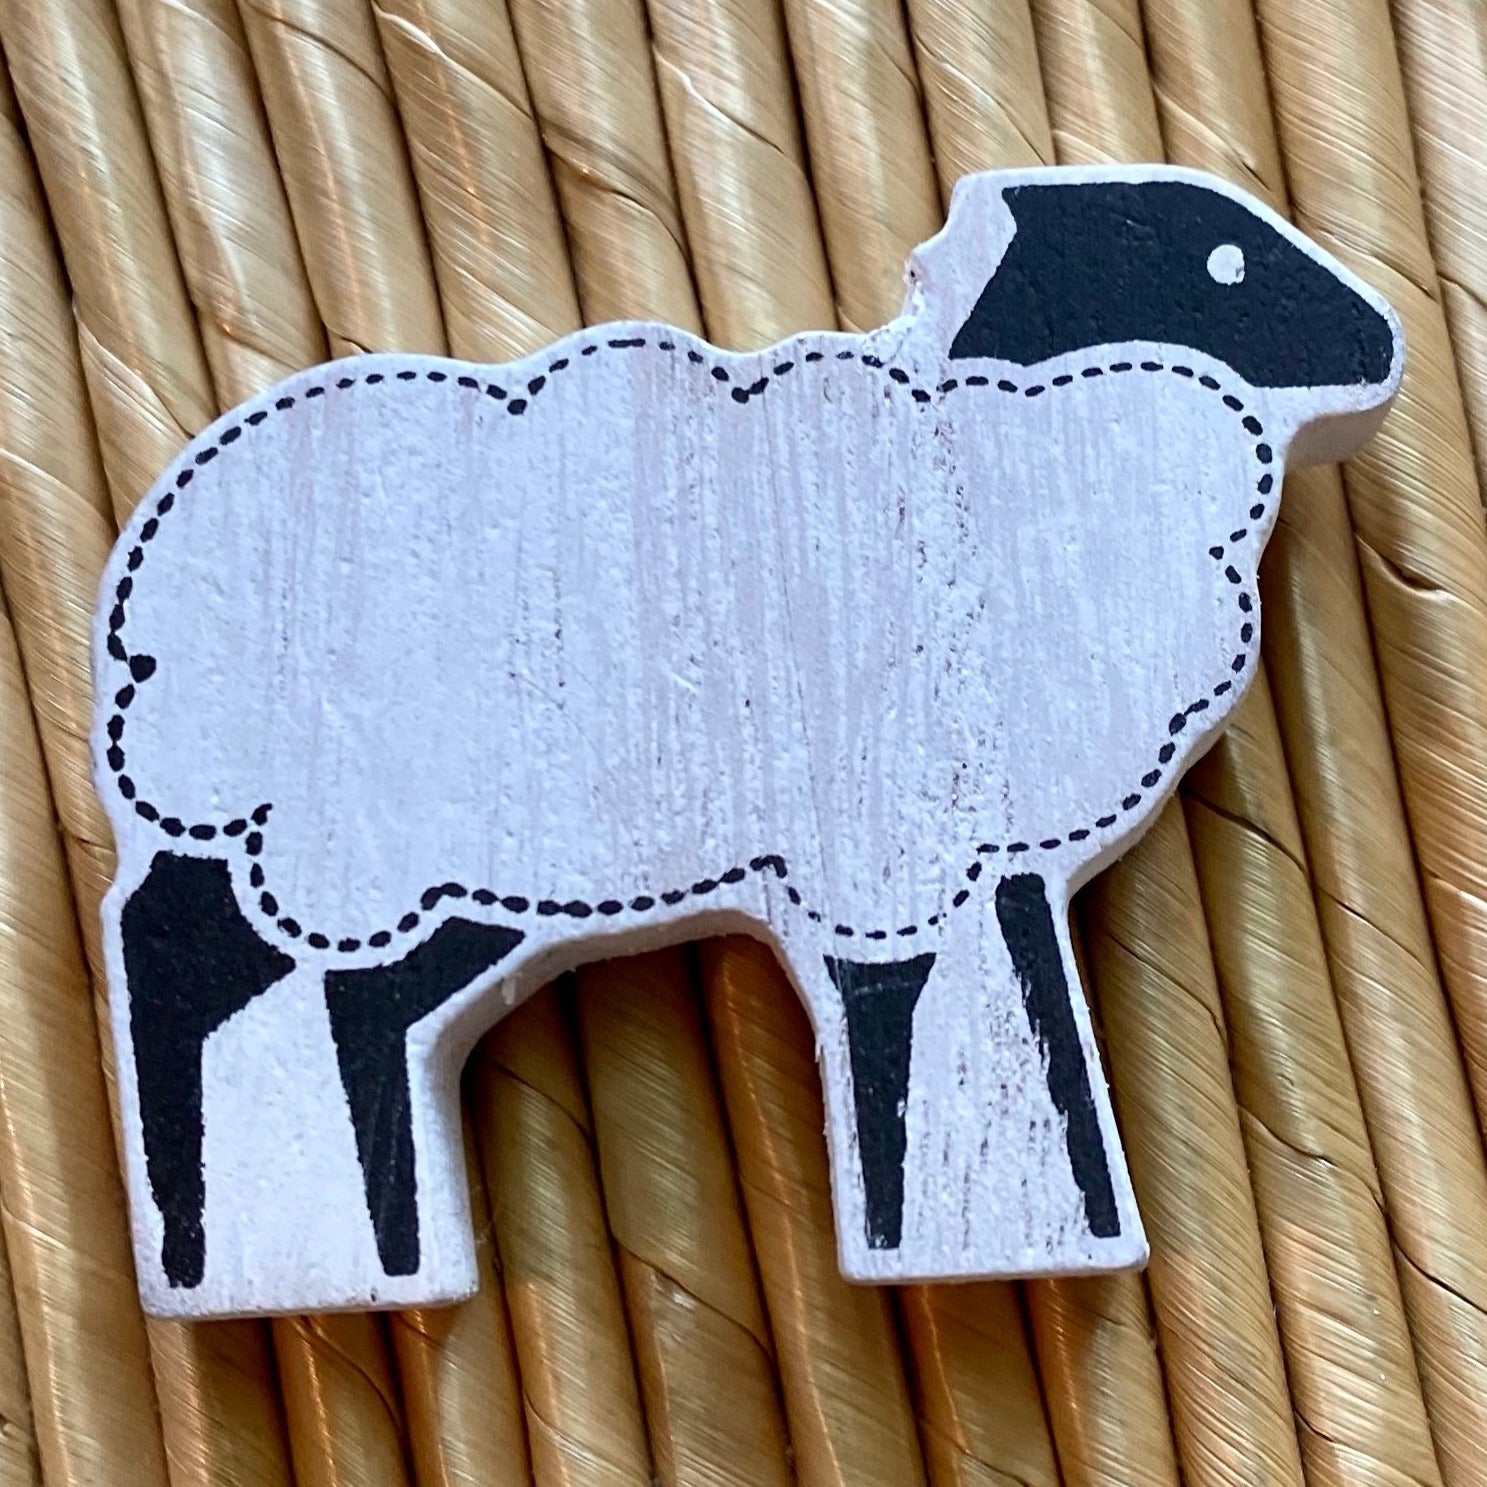 lamb sheep adams tile cut out shape for letterboard